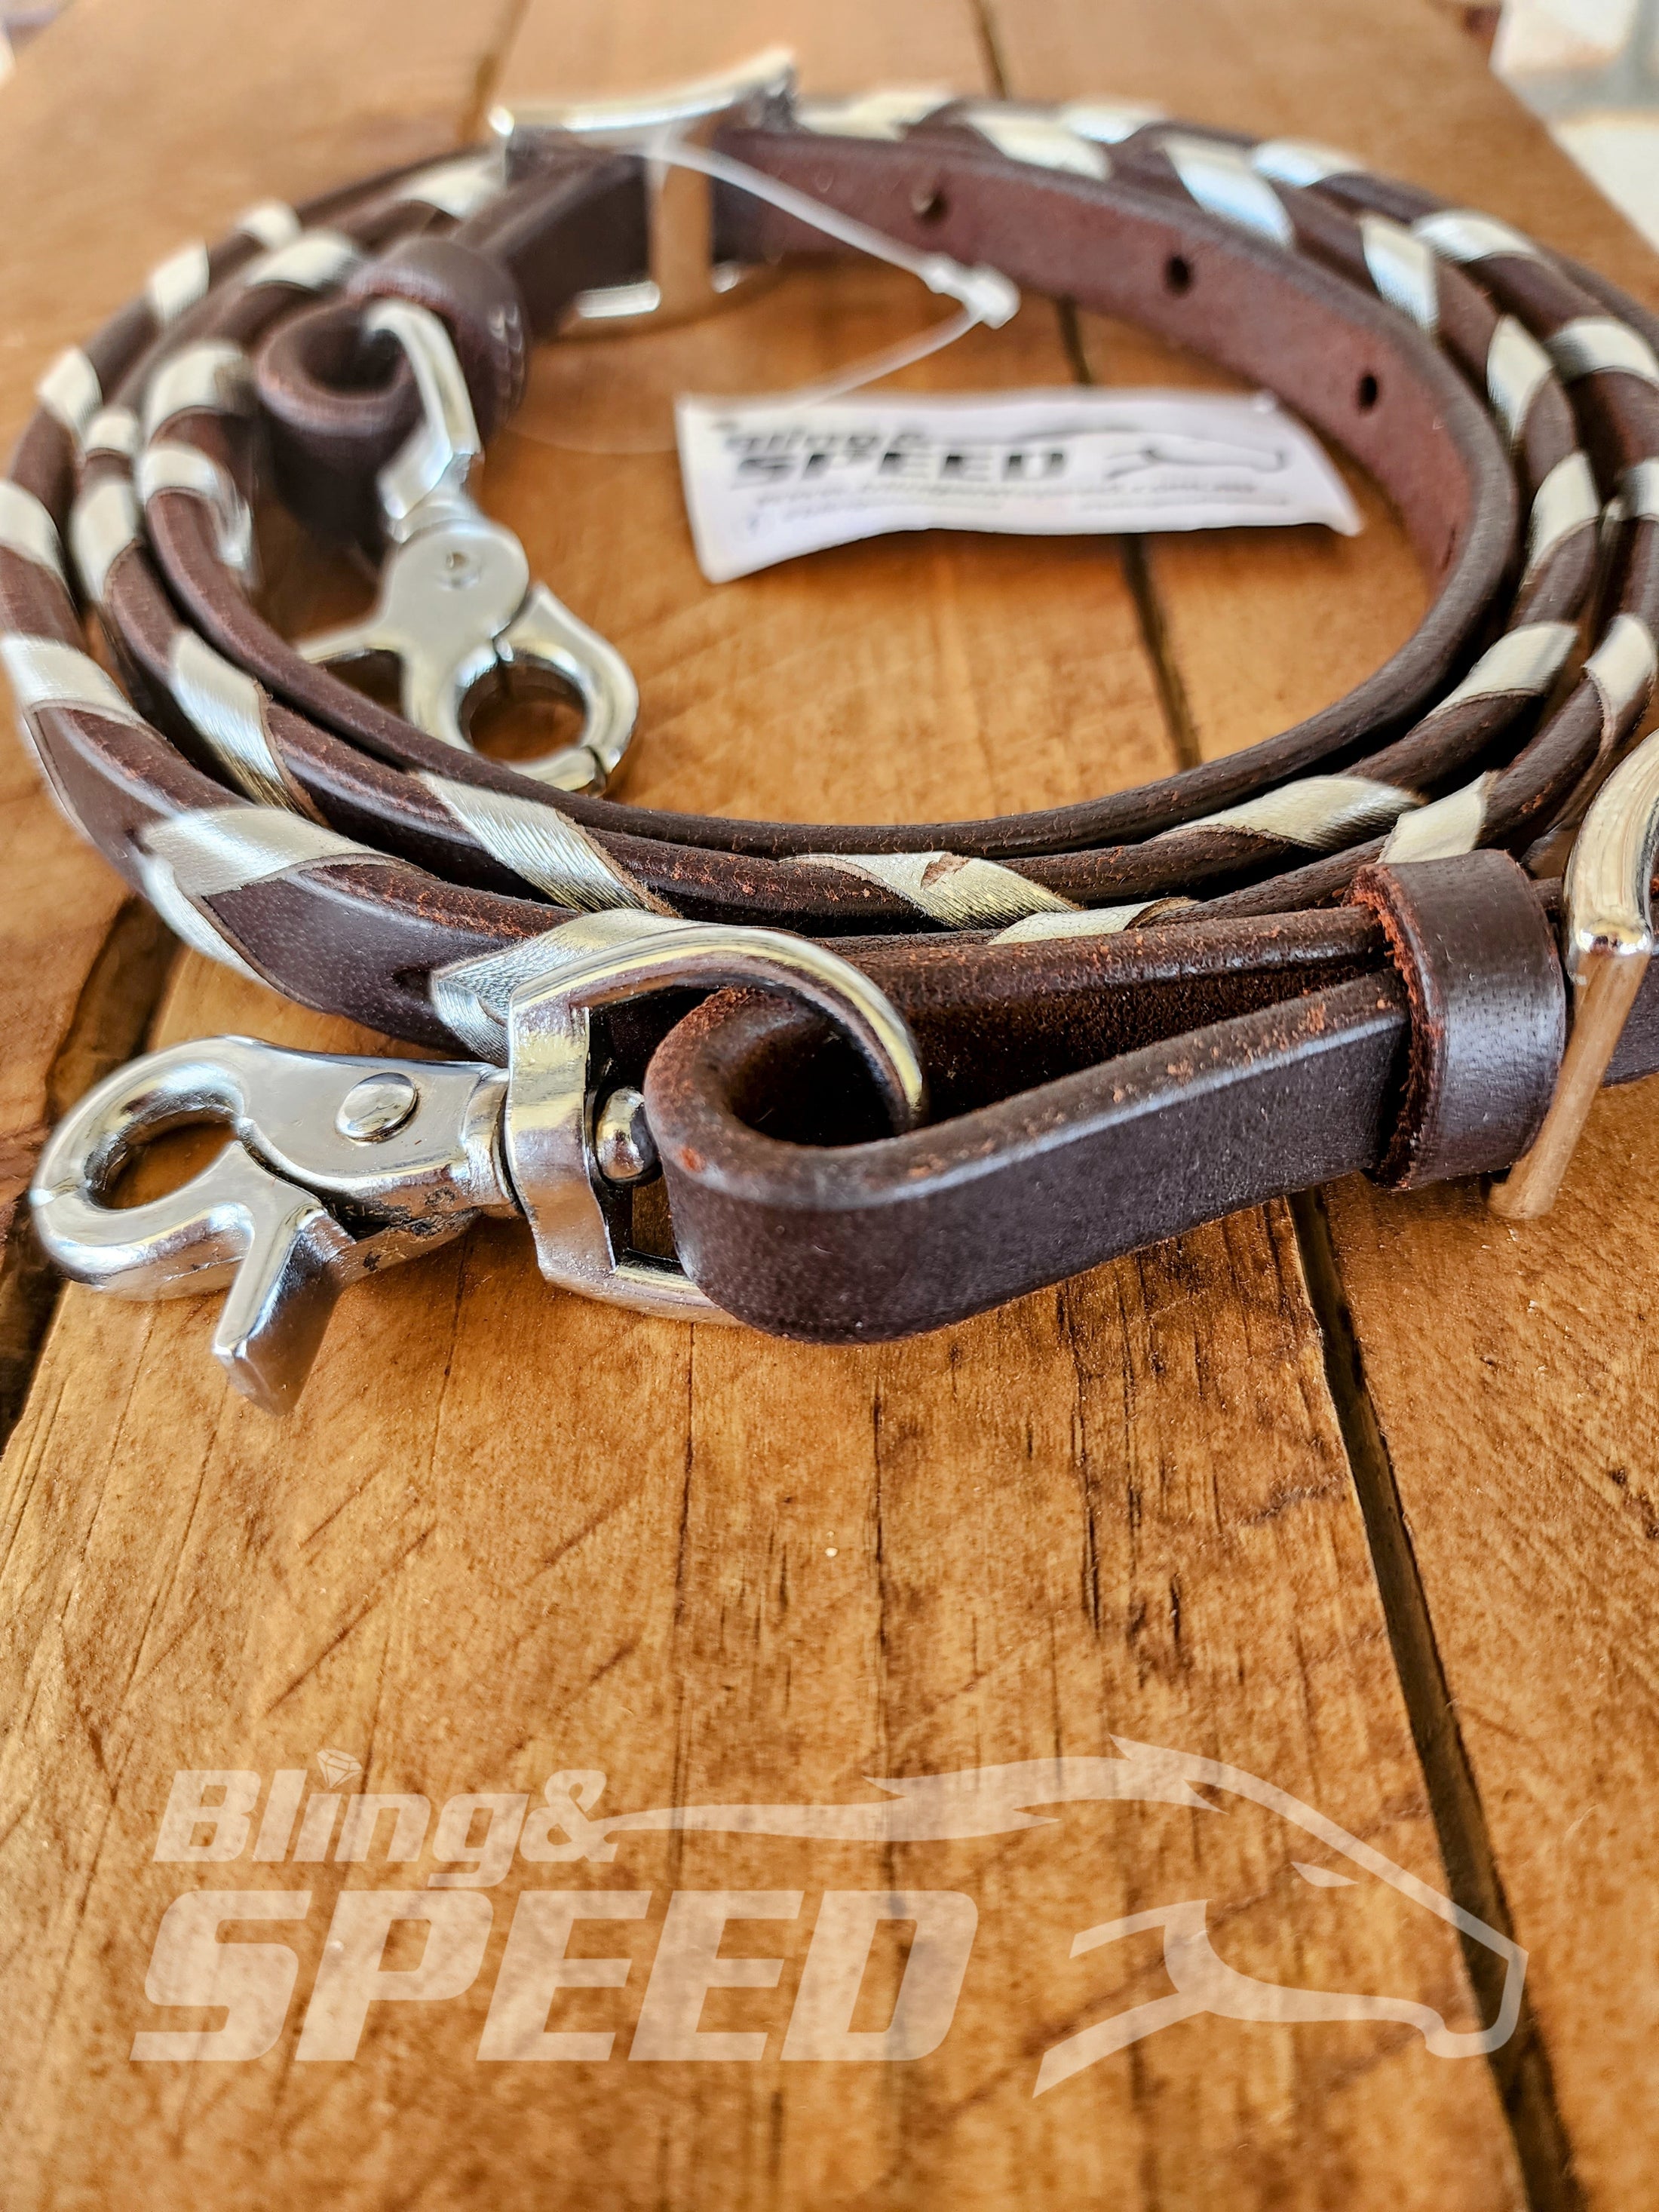 Bling and Speed Silver Laced Barrel Reins (7956290535662)